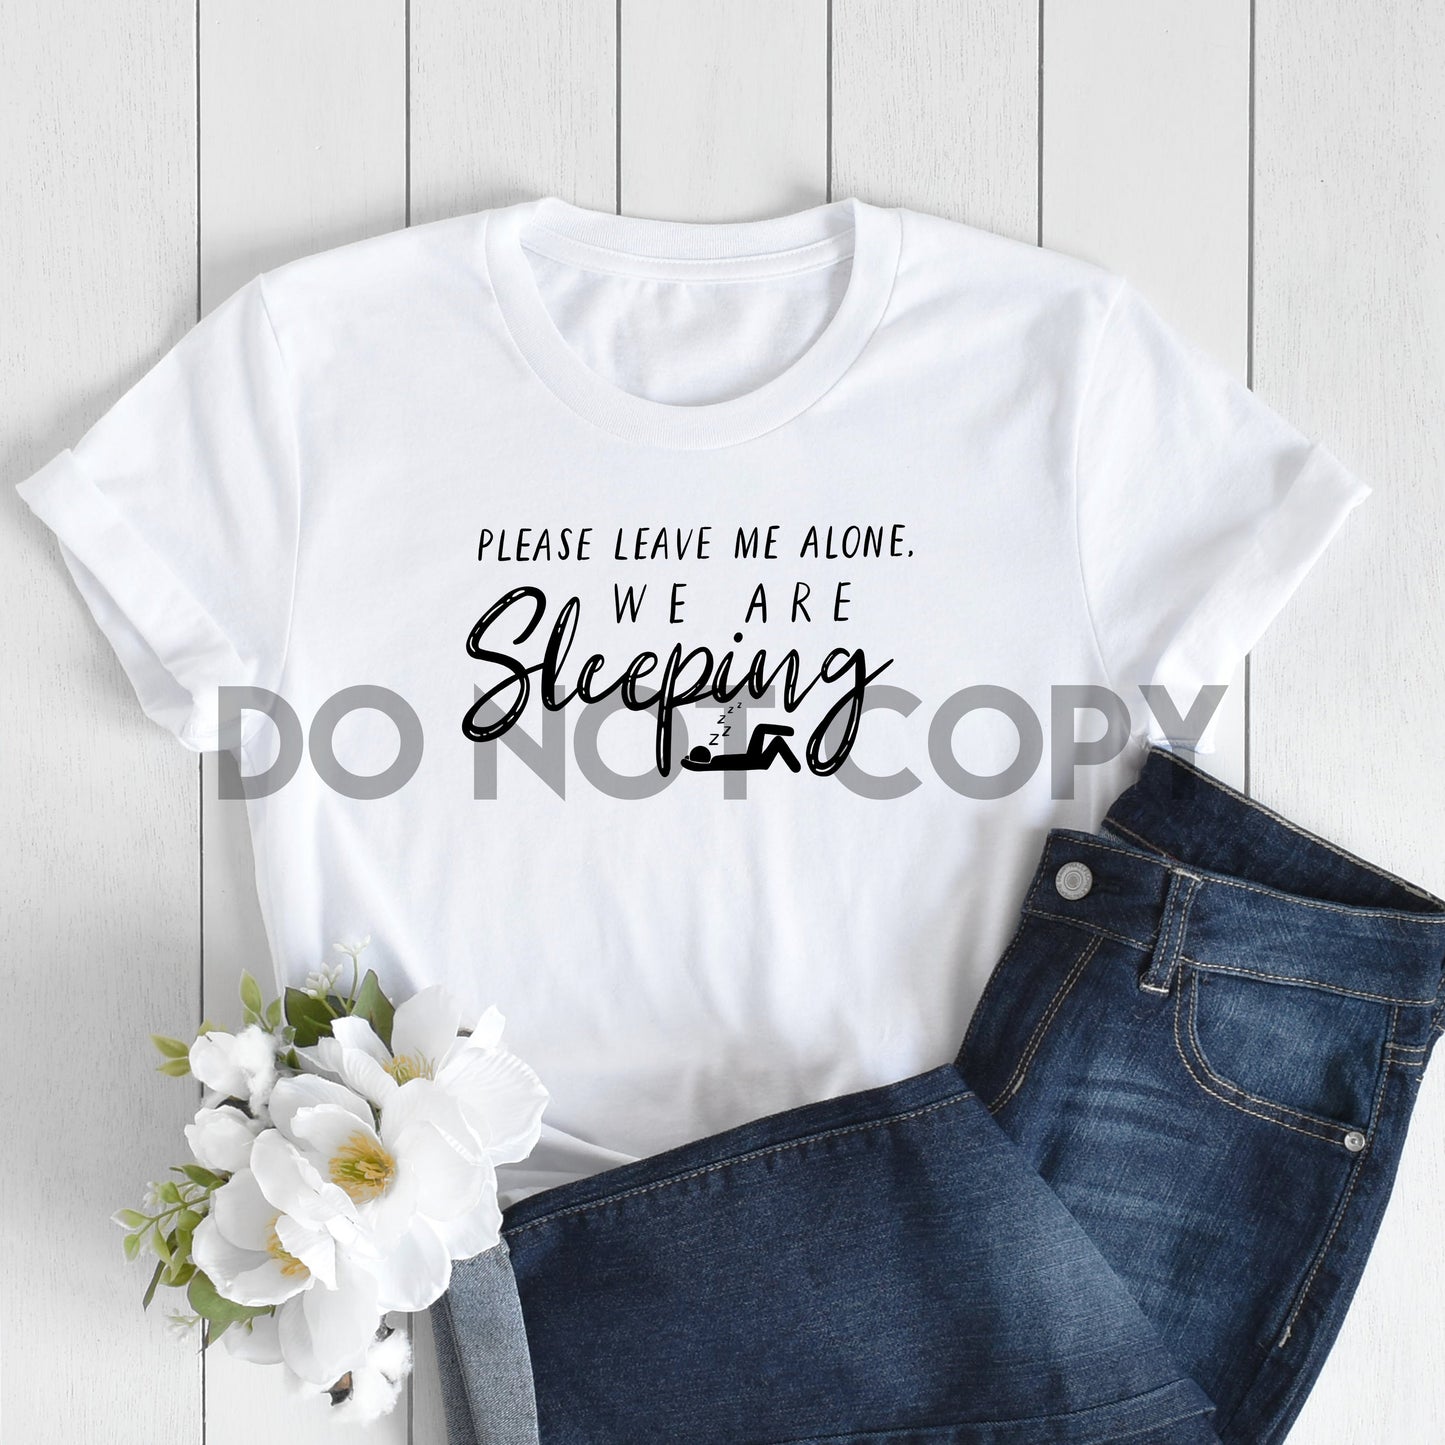 Please Leave Me Alone, We Are Sleeping Internet Drama Sublimation Print